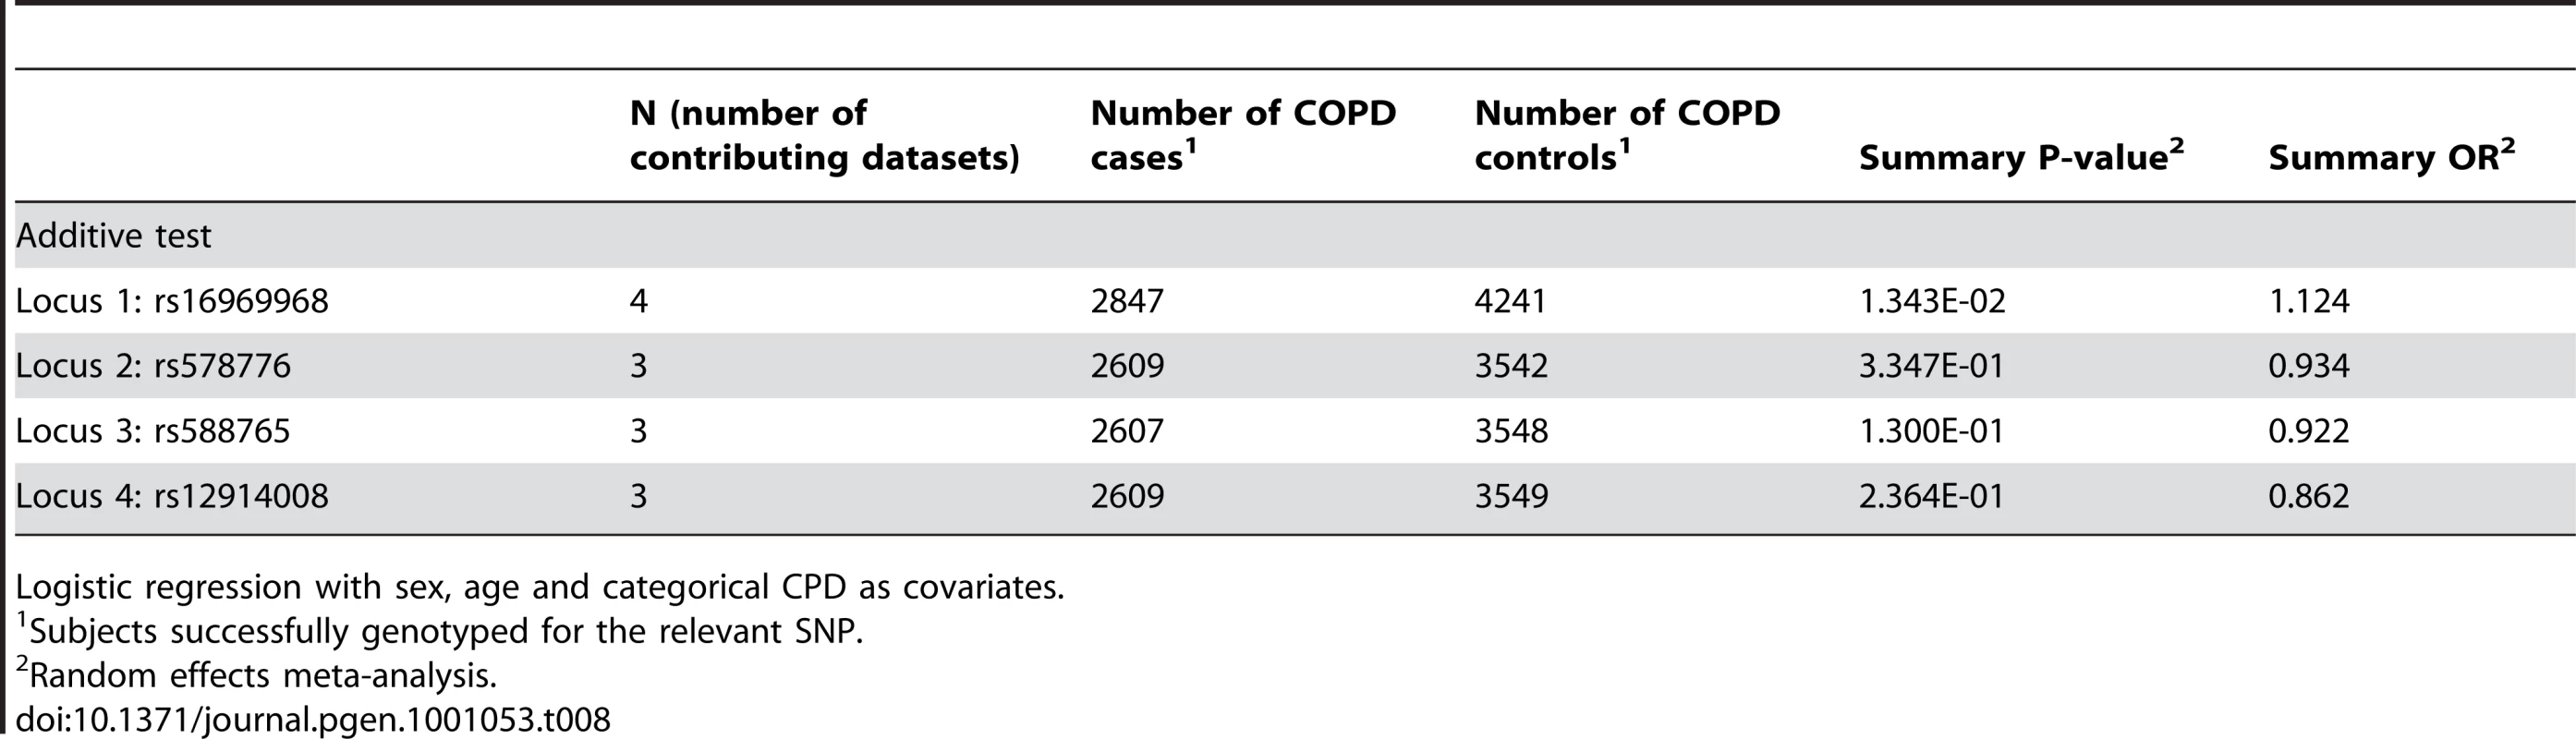 Meta-analysis results for COPD.